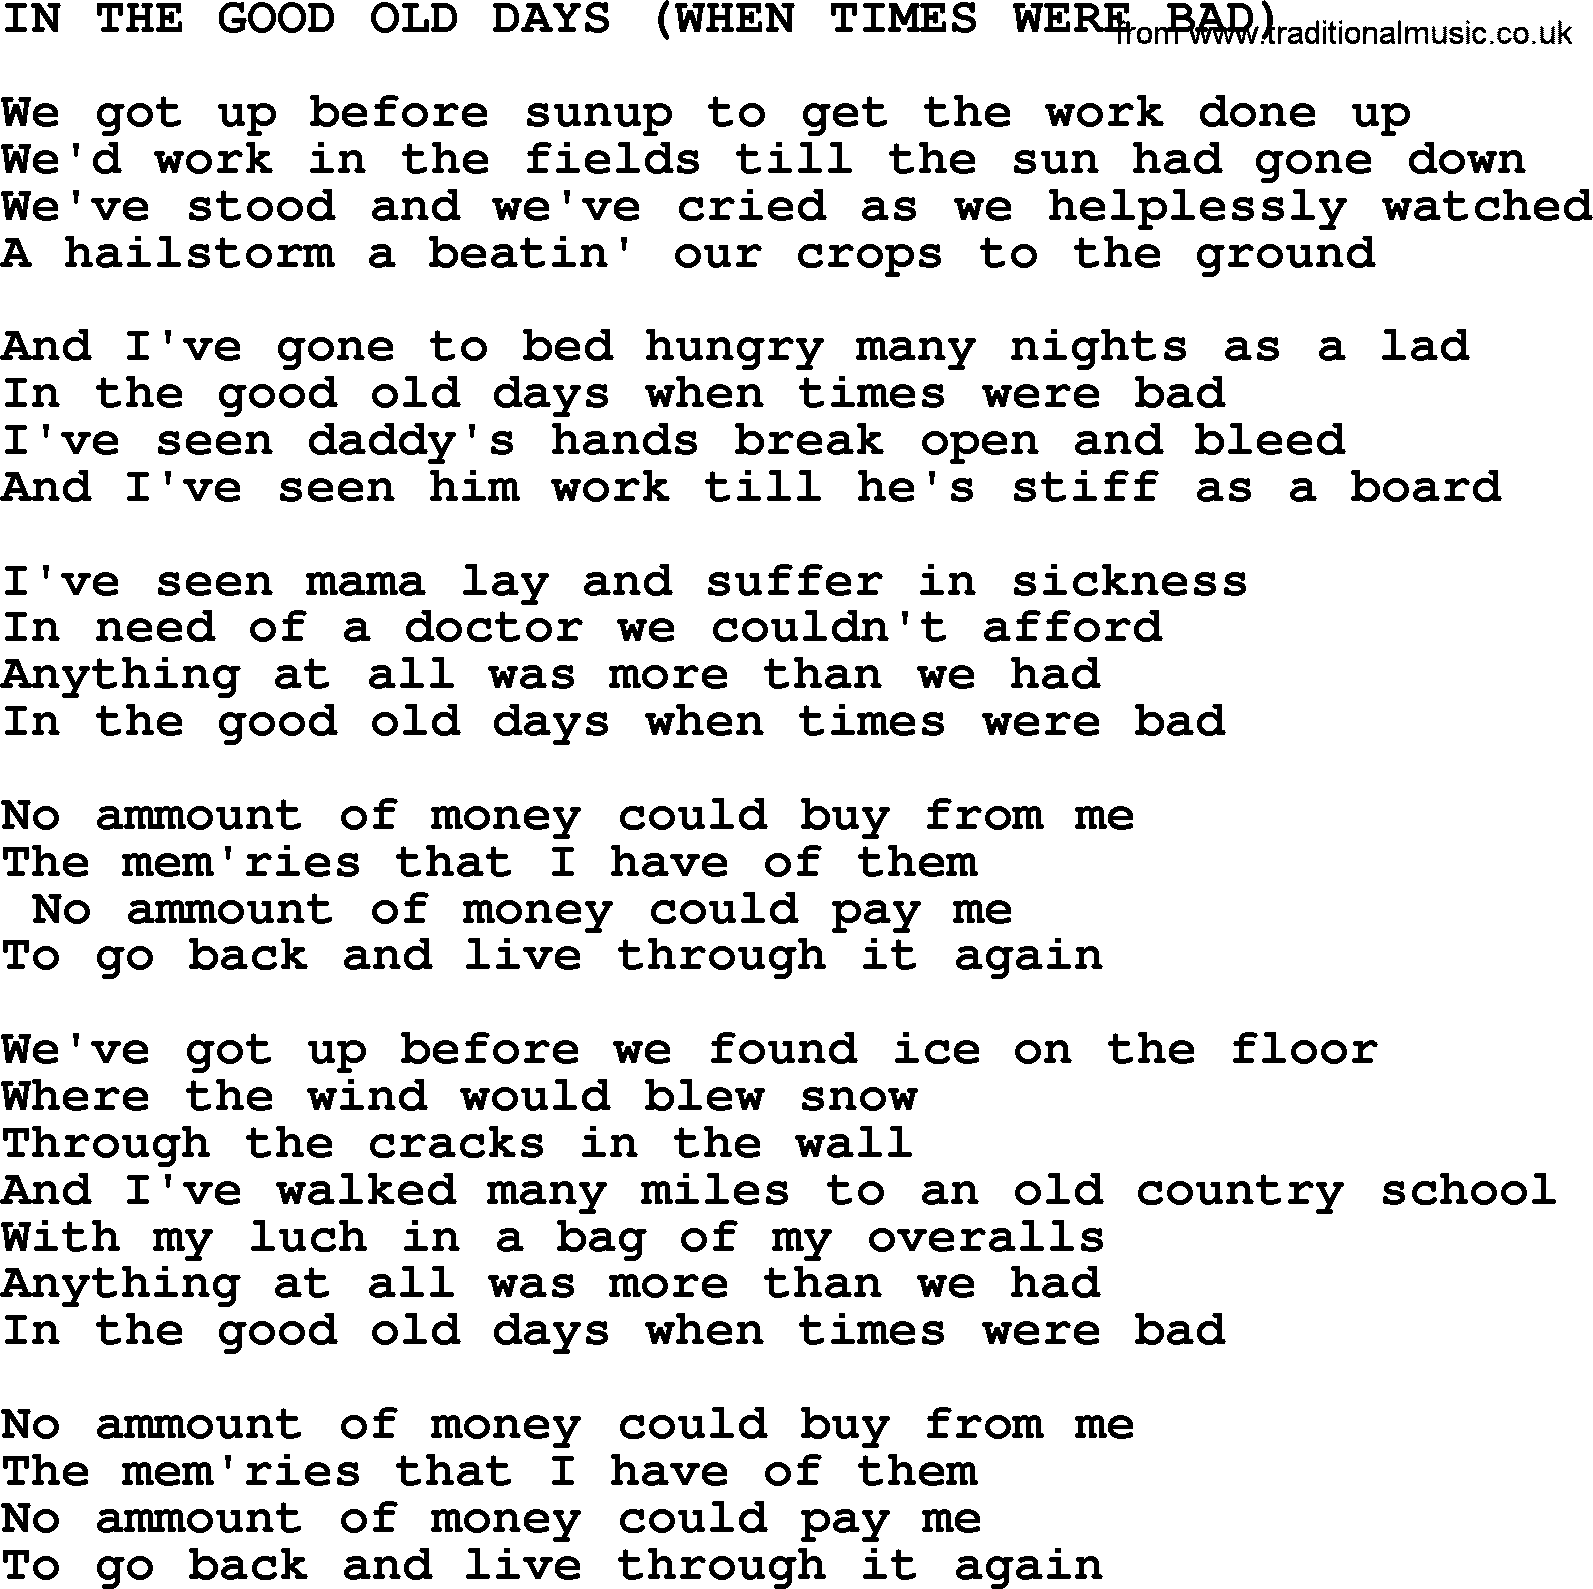 Merle Haggard song: In The Good Old Days When Times Were Bad, lyrics.